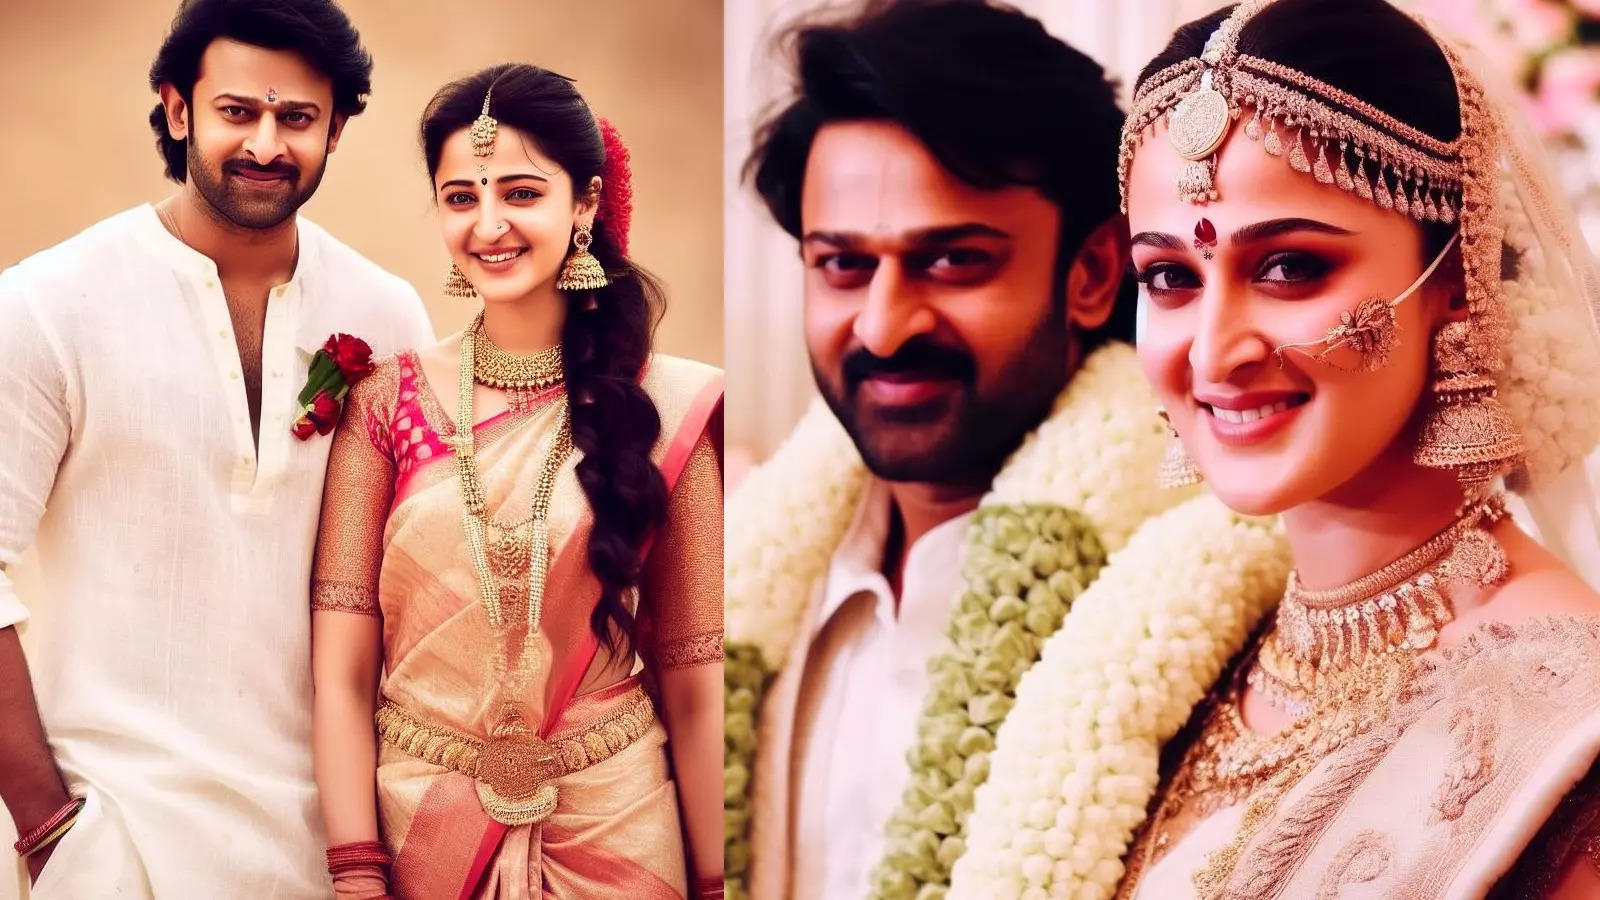 Prabhas Anushka Sex Videos - Anushka Shetty & Prabhas' pictures as bride and groom take the internet  storm; but here is the CATCHâ€¦ | Etimes - Times of India Videos